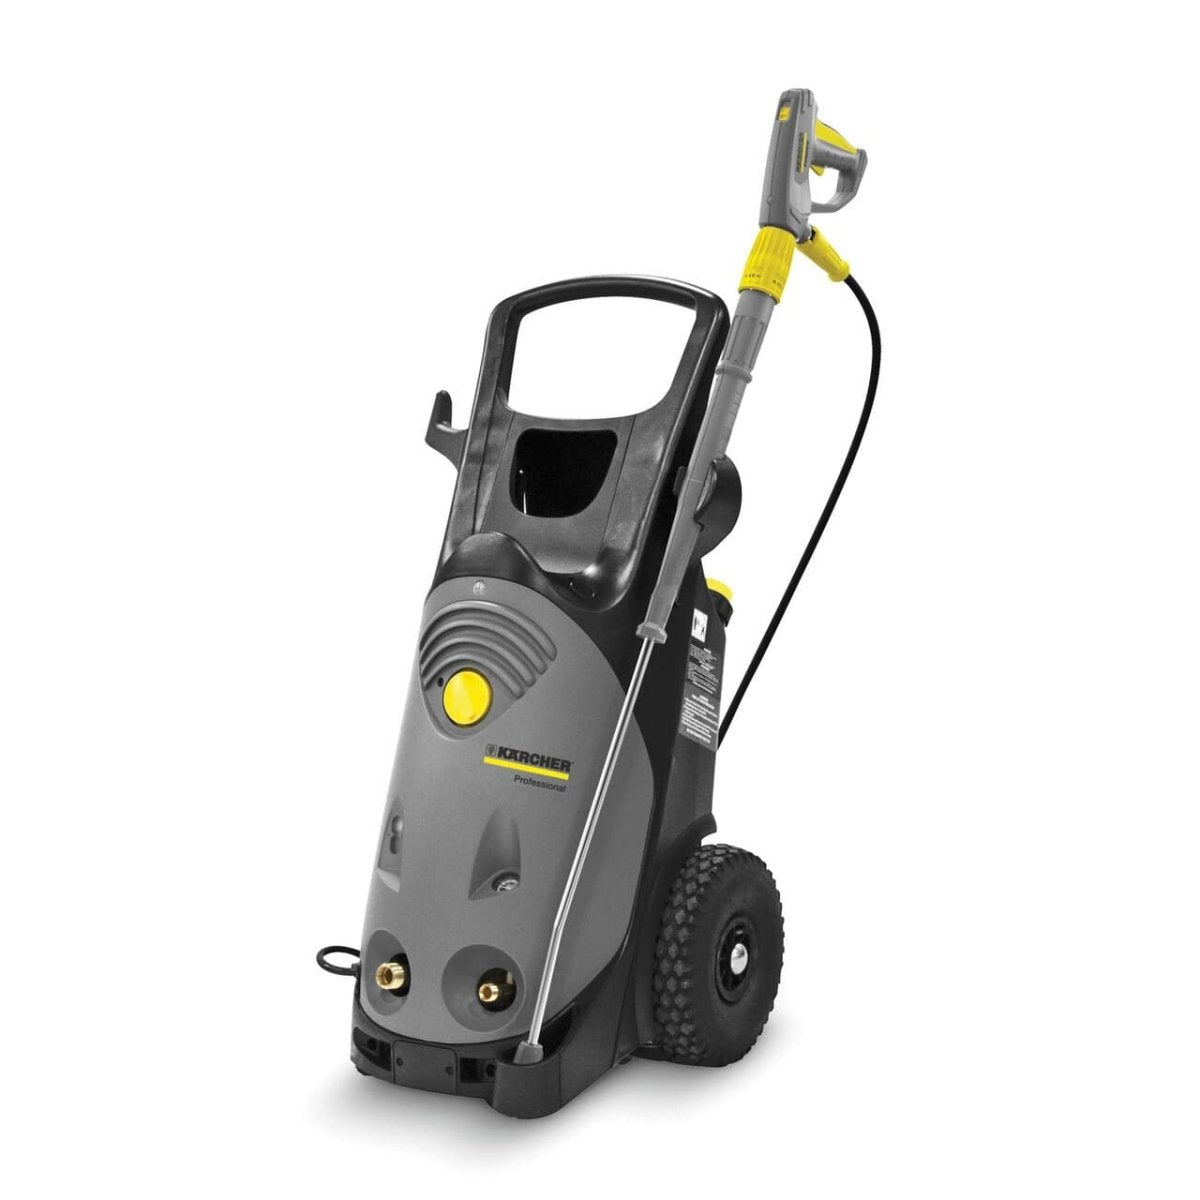 Kärcher - Commercial Electric Pressure Washer - Pro HD 400 ED - 1300 PSI -  With EASY! Force Trigger Gun - 1.7 GPM